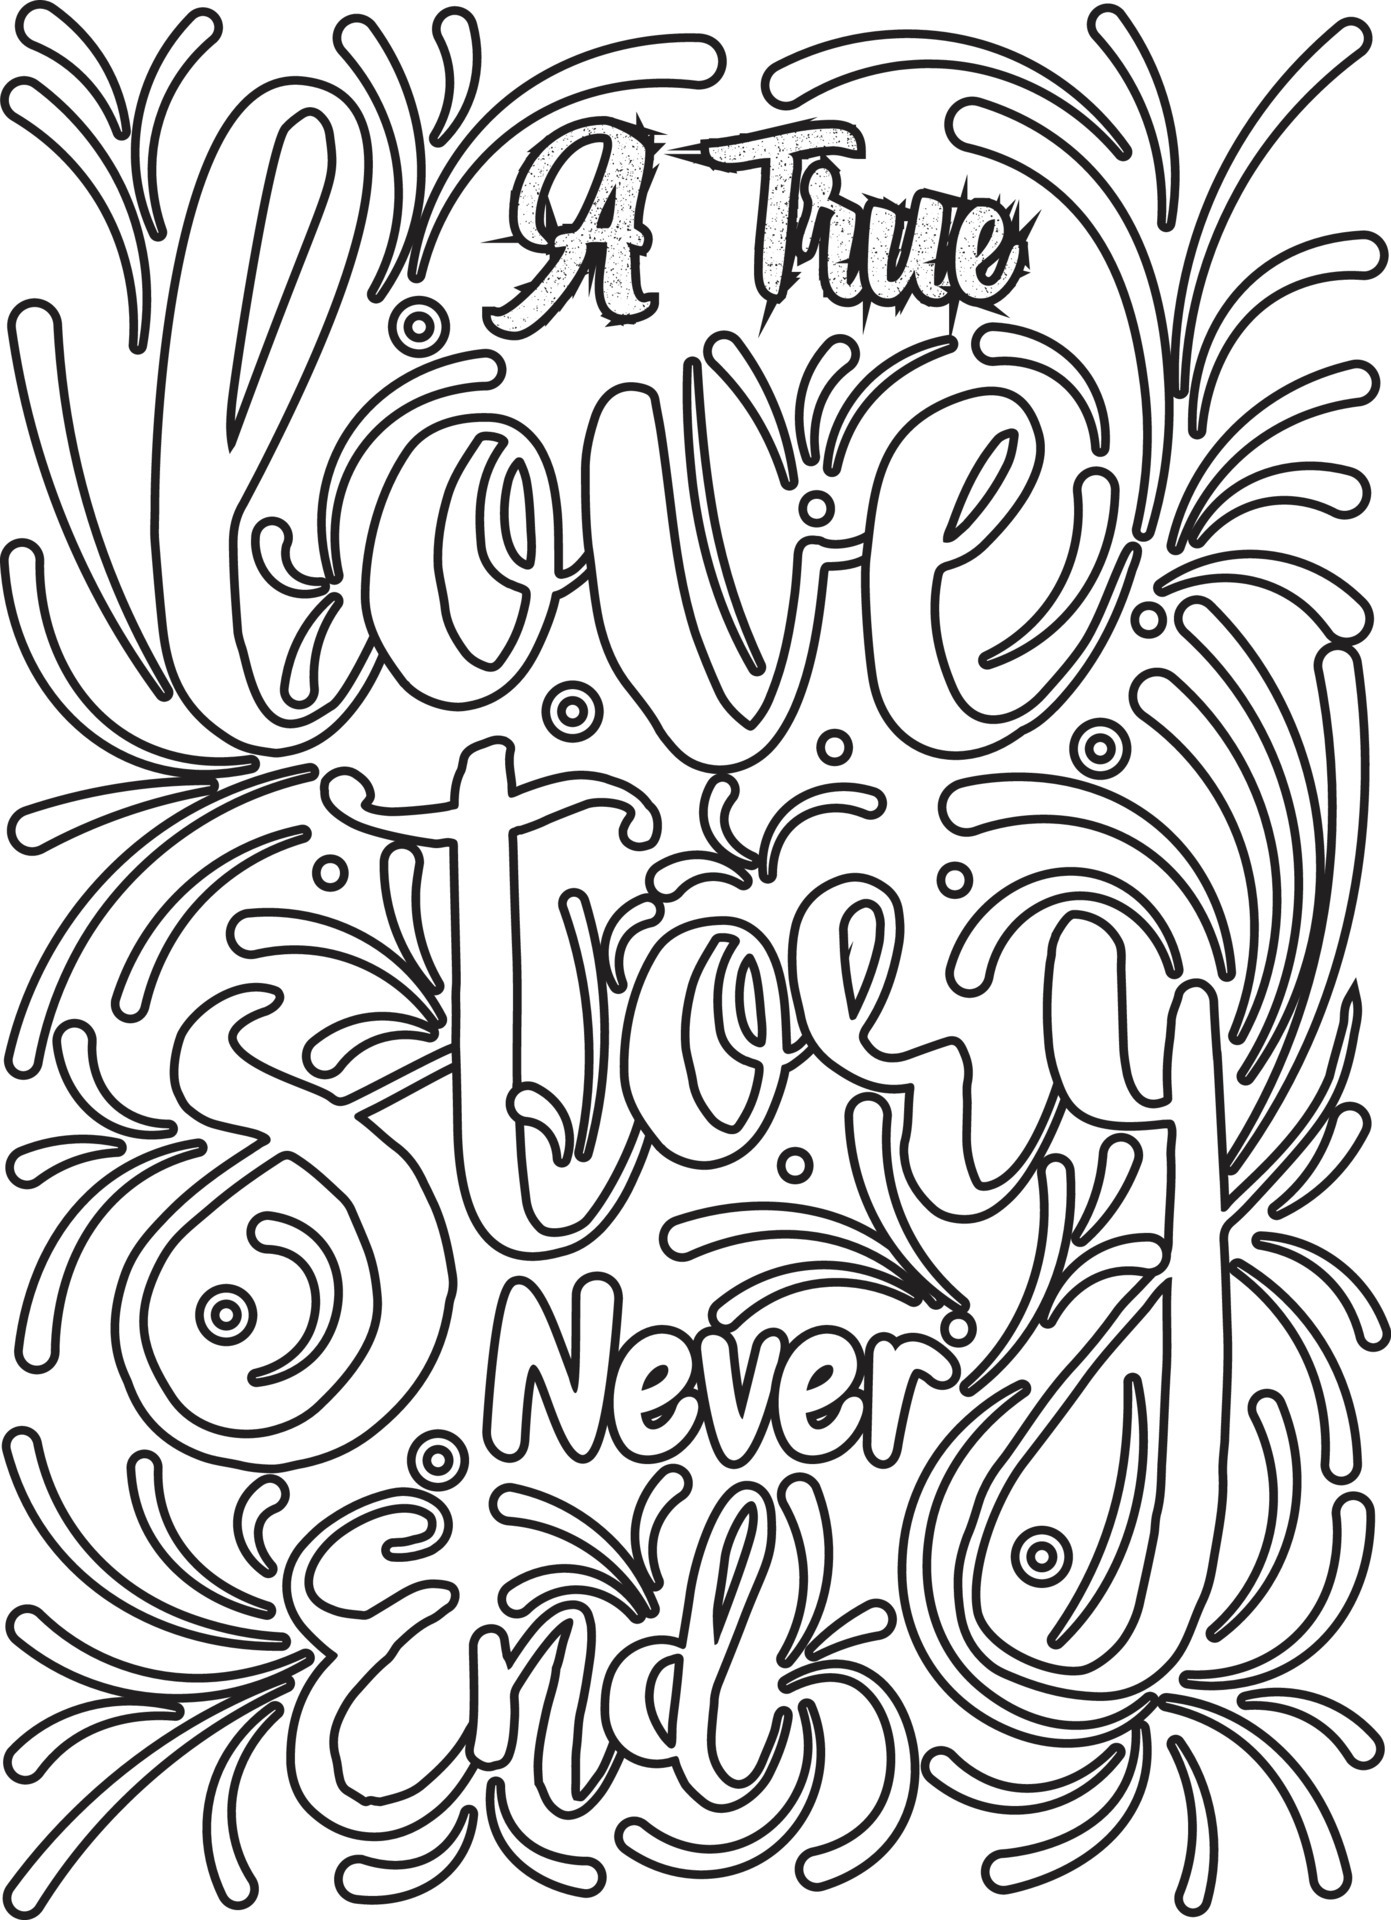 a true love story never end. Motivational Quotes coloring page .coloring  book design. 4970991 Vector Art at Vecteezy